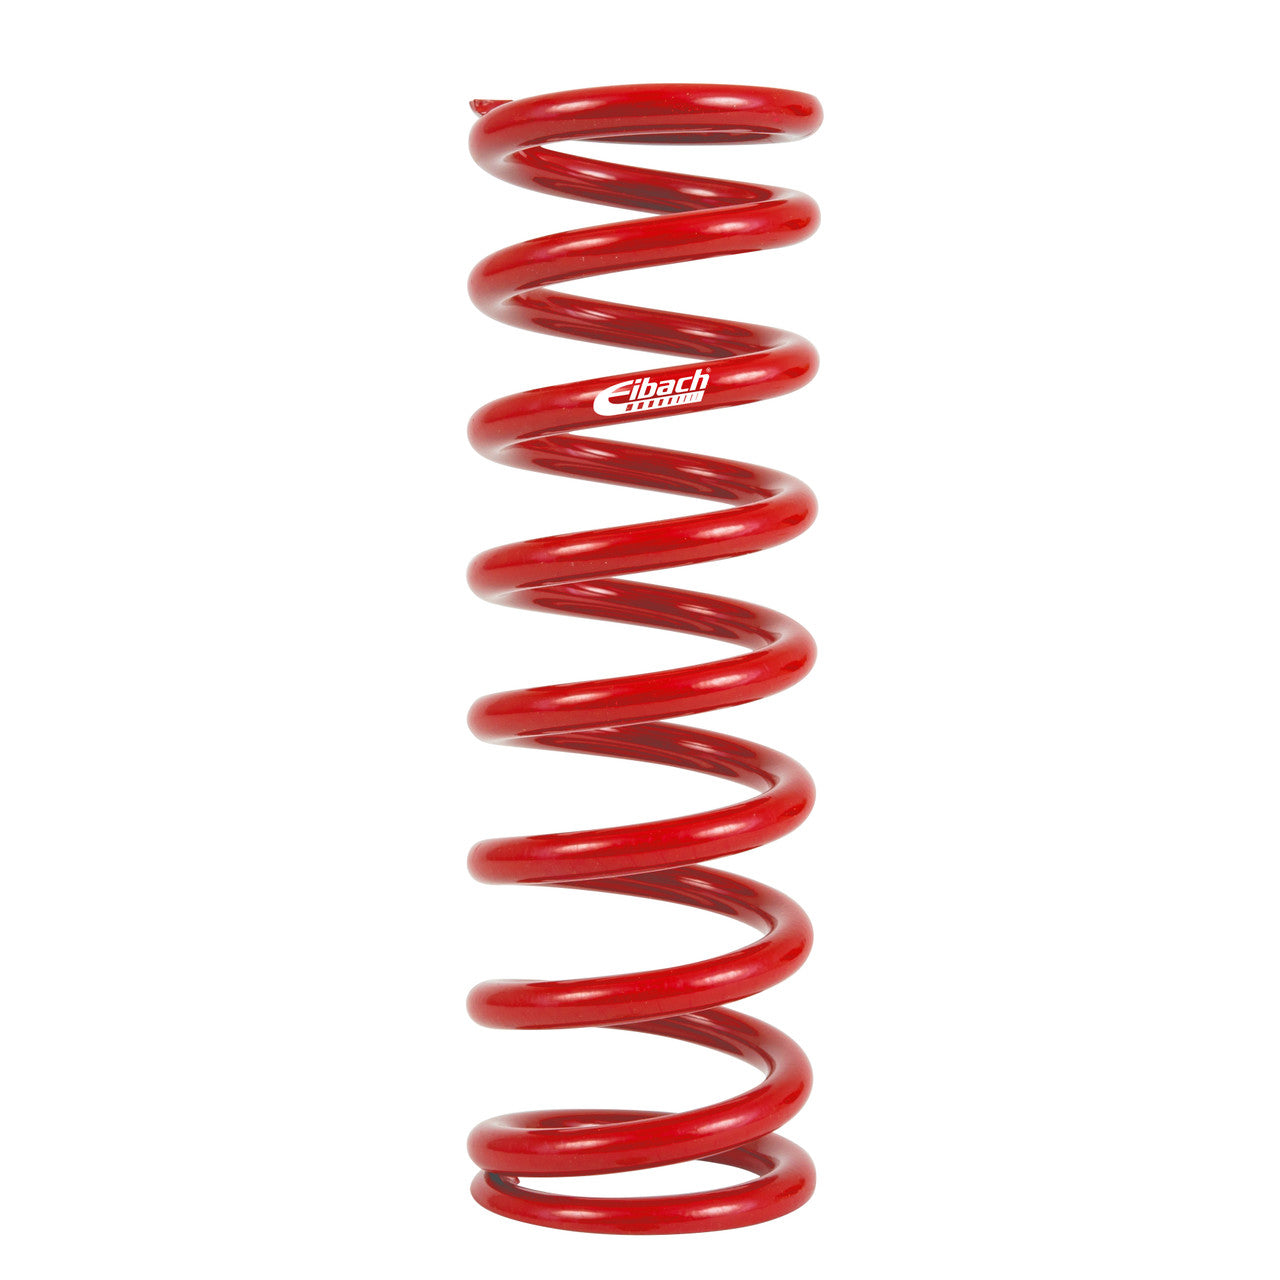 Eibach Metric Coilover Spring - 70MM I.D. 300-70-0050